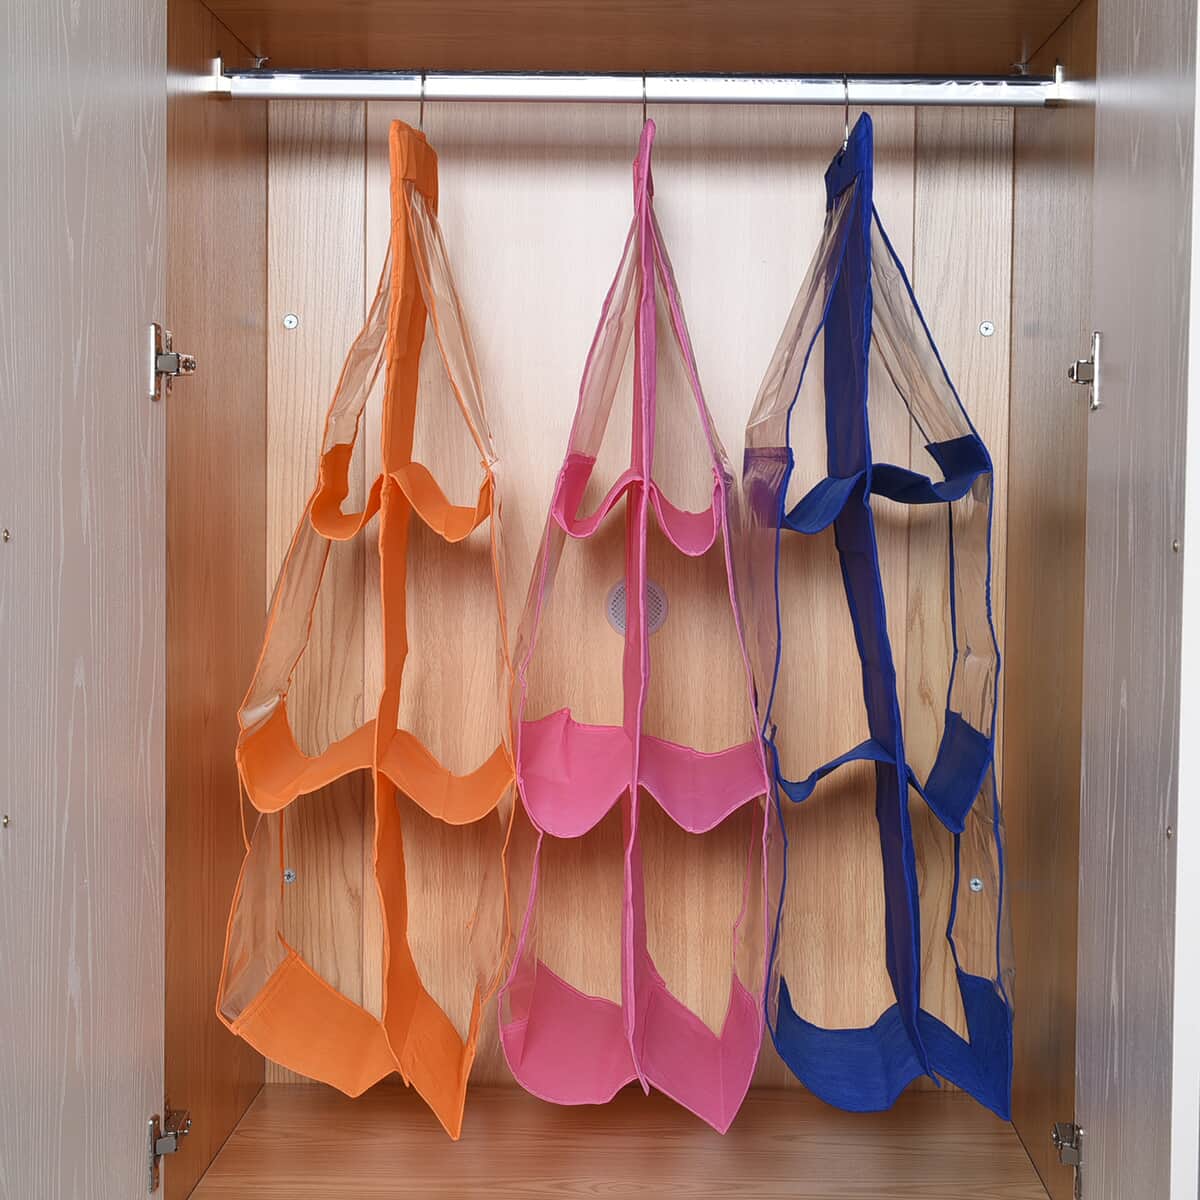 Set of 3 Orange, Dark Blue and Pink Non-Woven Hanging Storage Bag wih Large Clear Window (12.8"x31") image number 0